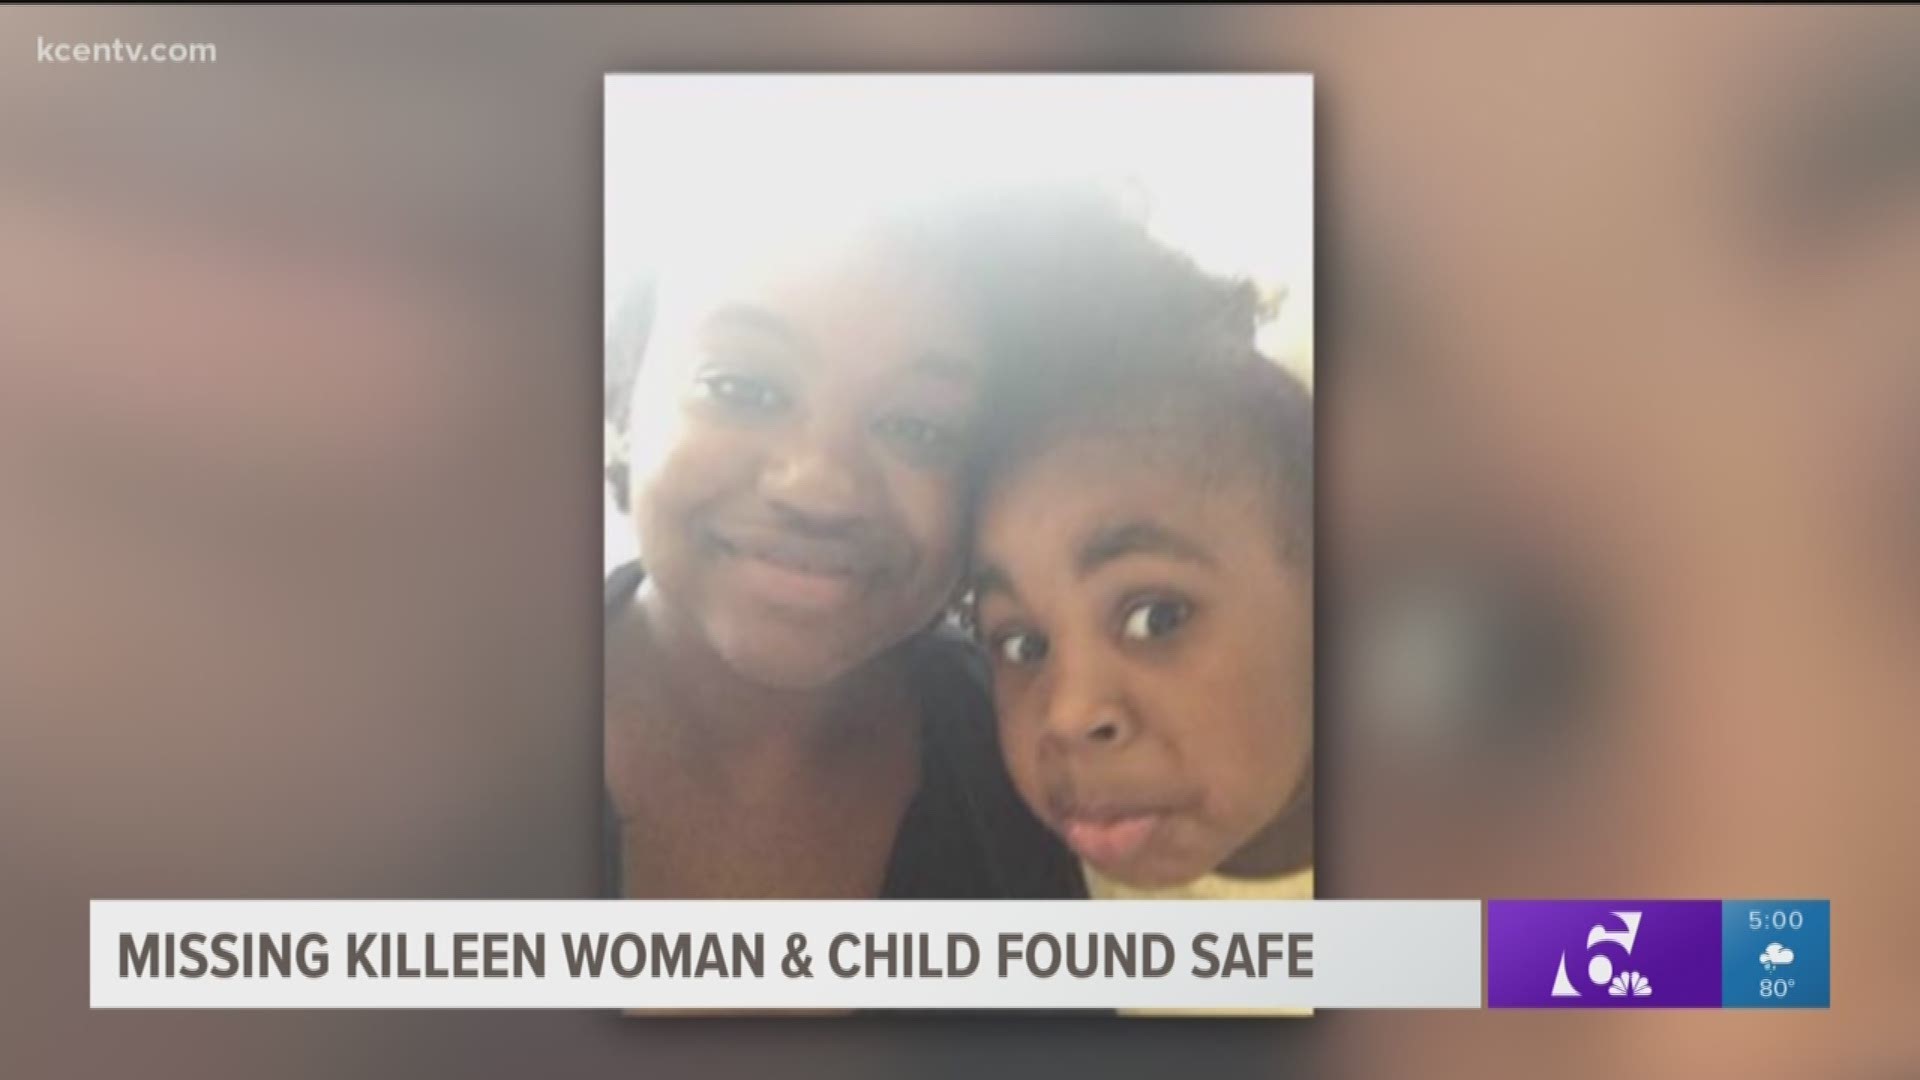 A woman and her 3-year-old daughter who were reported missing Friday were found safe, police said.